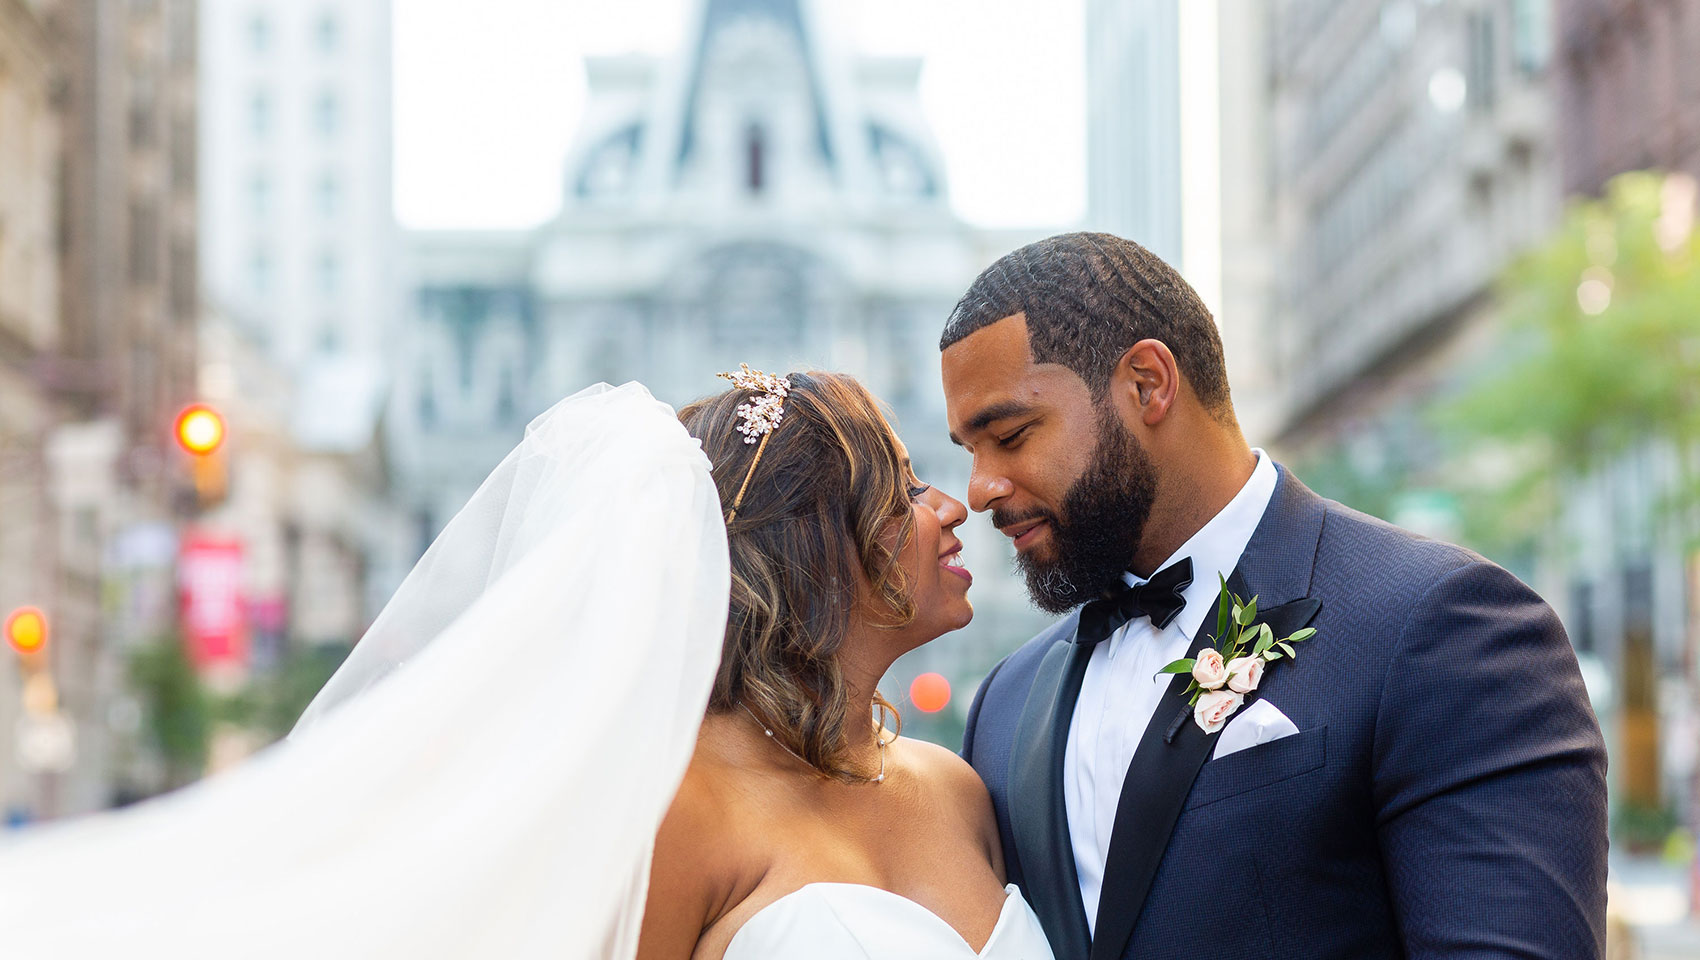 Bride and groom kissing in front of Philadelphia’s City Hall building exterior